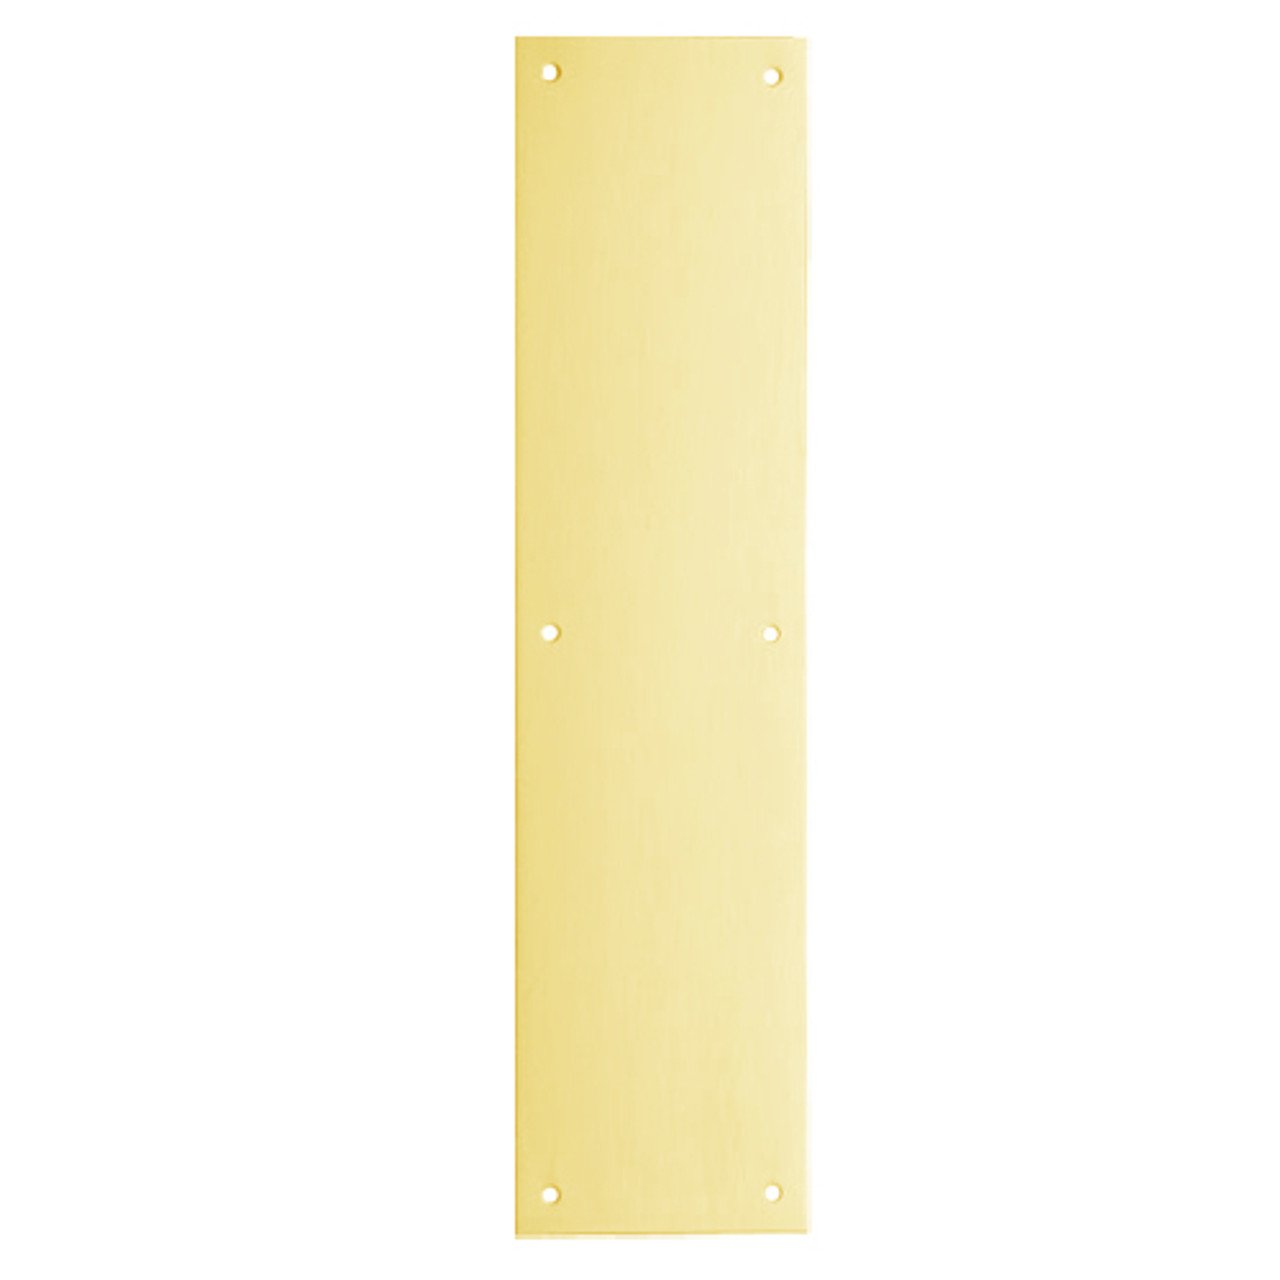 8200-US3-3-5x15 IVES Architectural Door Trim 3.5x15 Inch Push Plate in Bright Brass